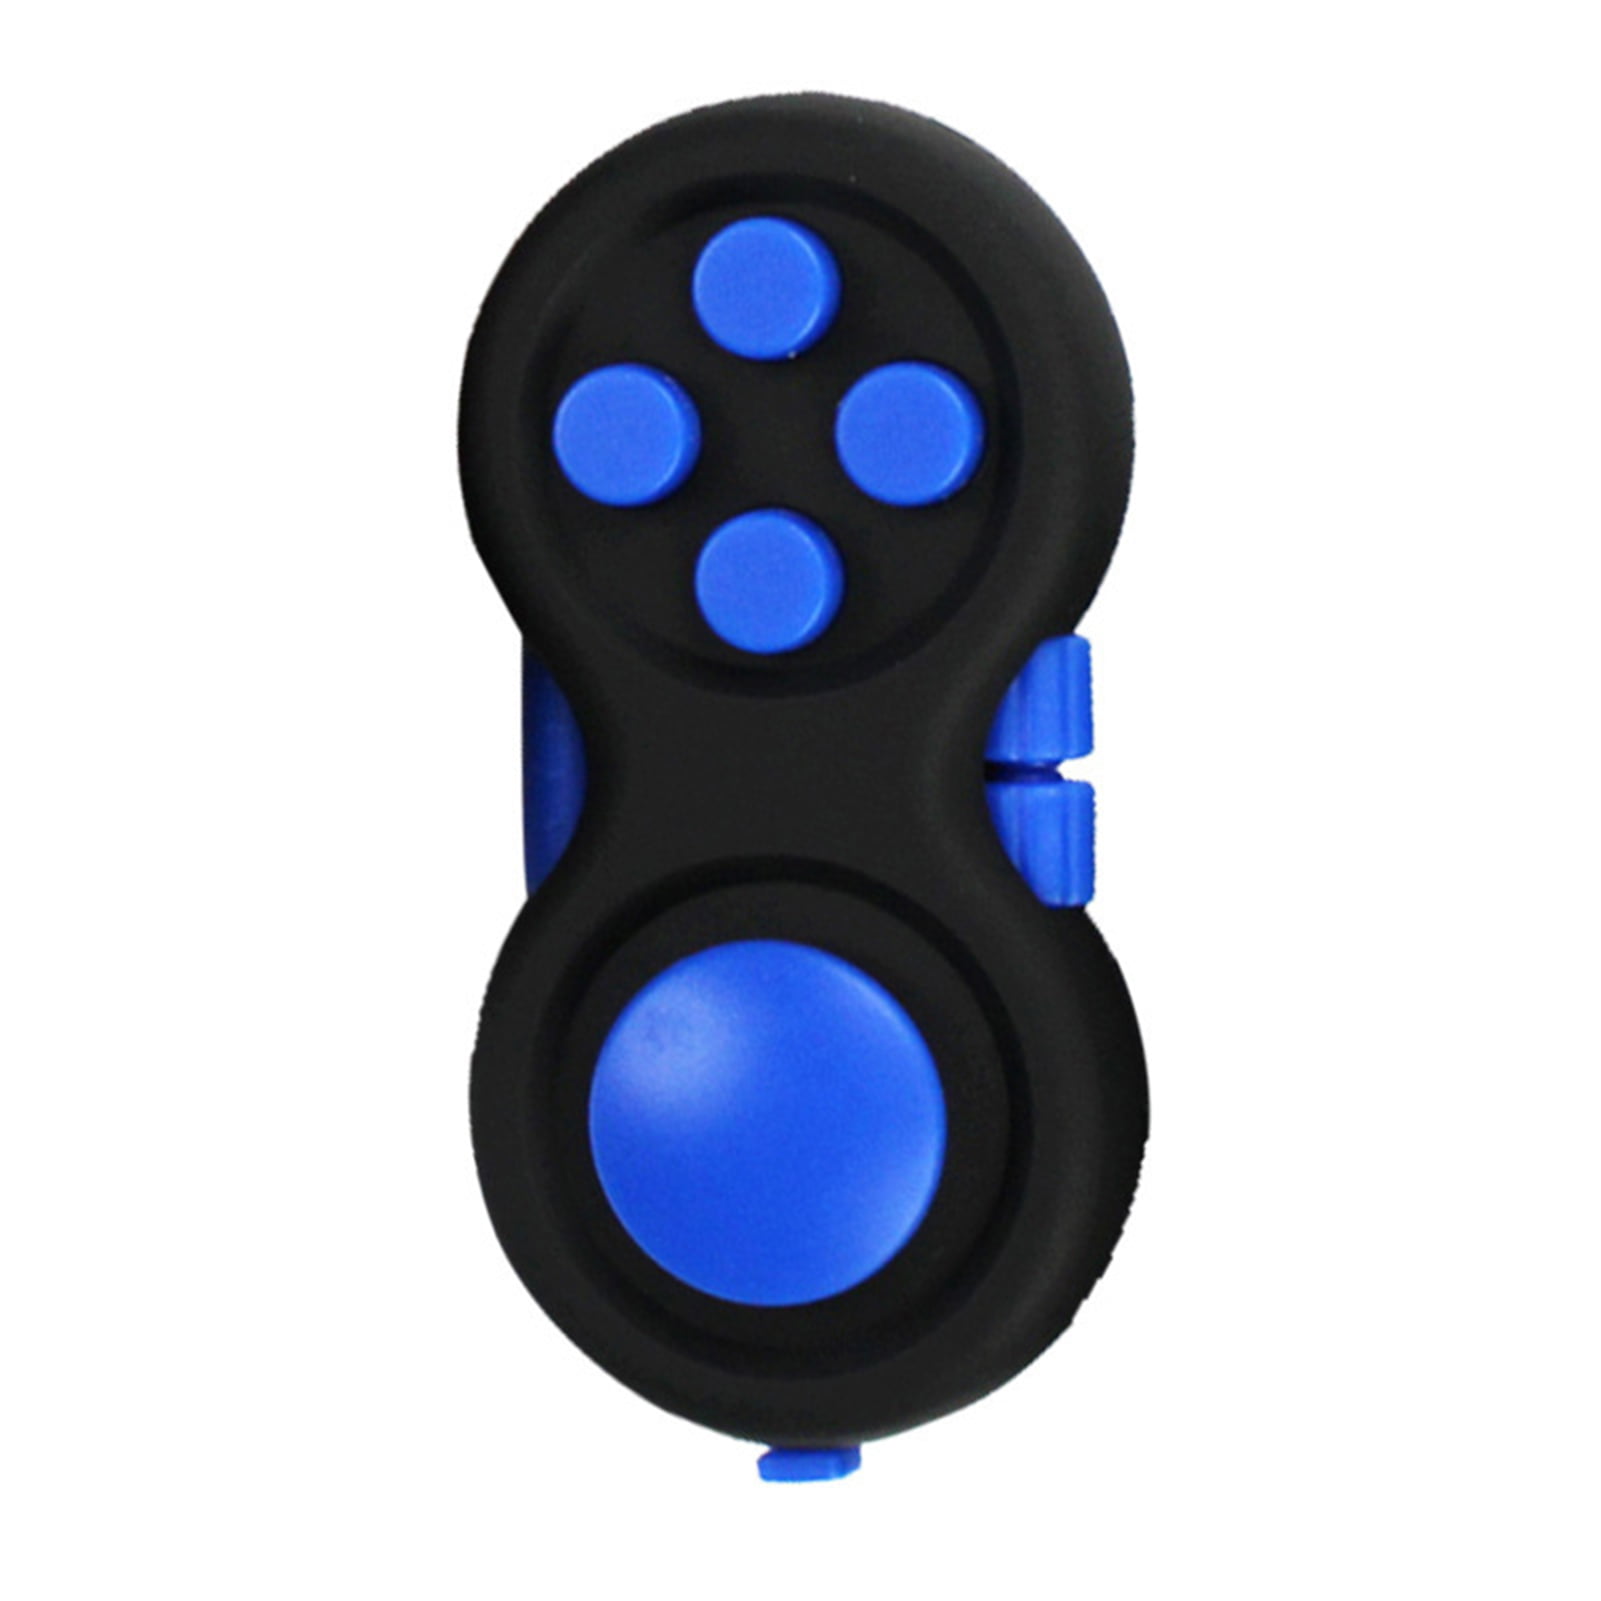 Game Controller Fidget Pad Stress Relief Toy Controller Stim Toy Funny Toy for Adults Children